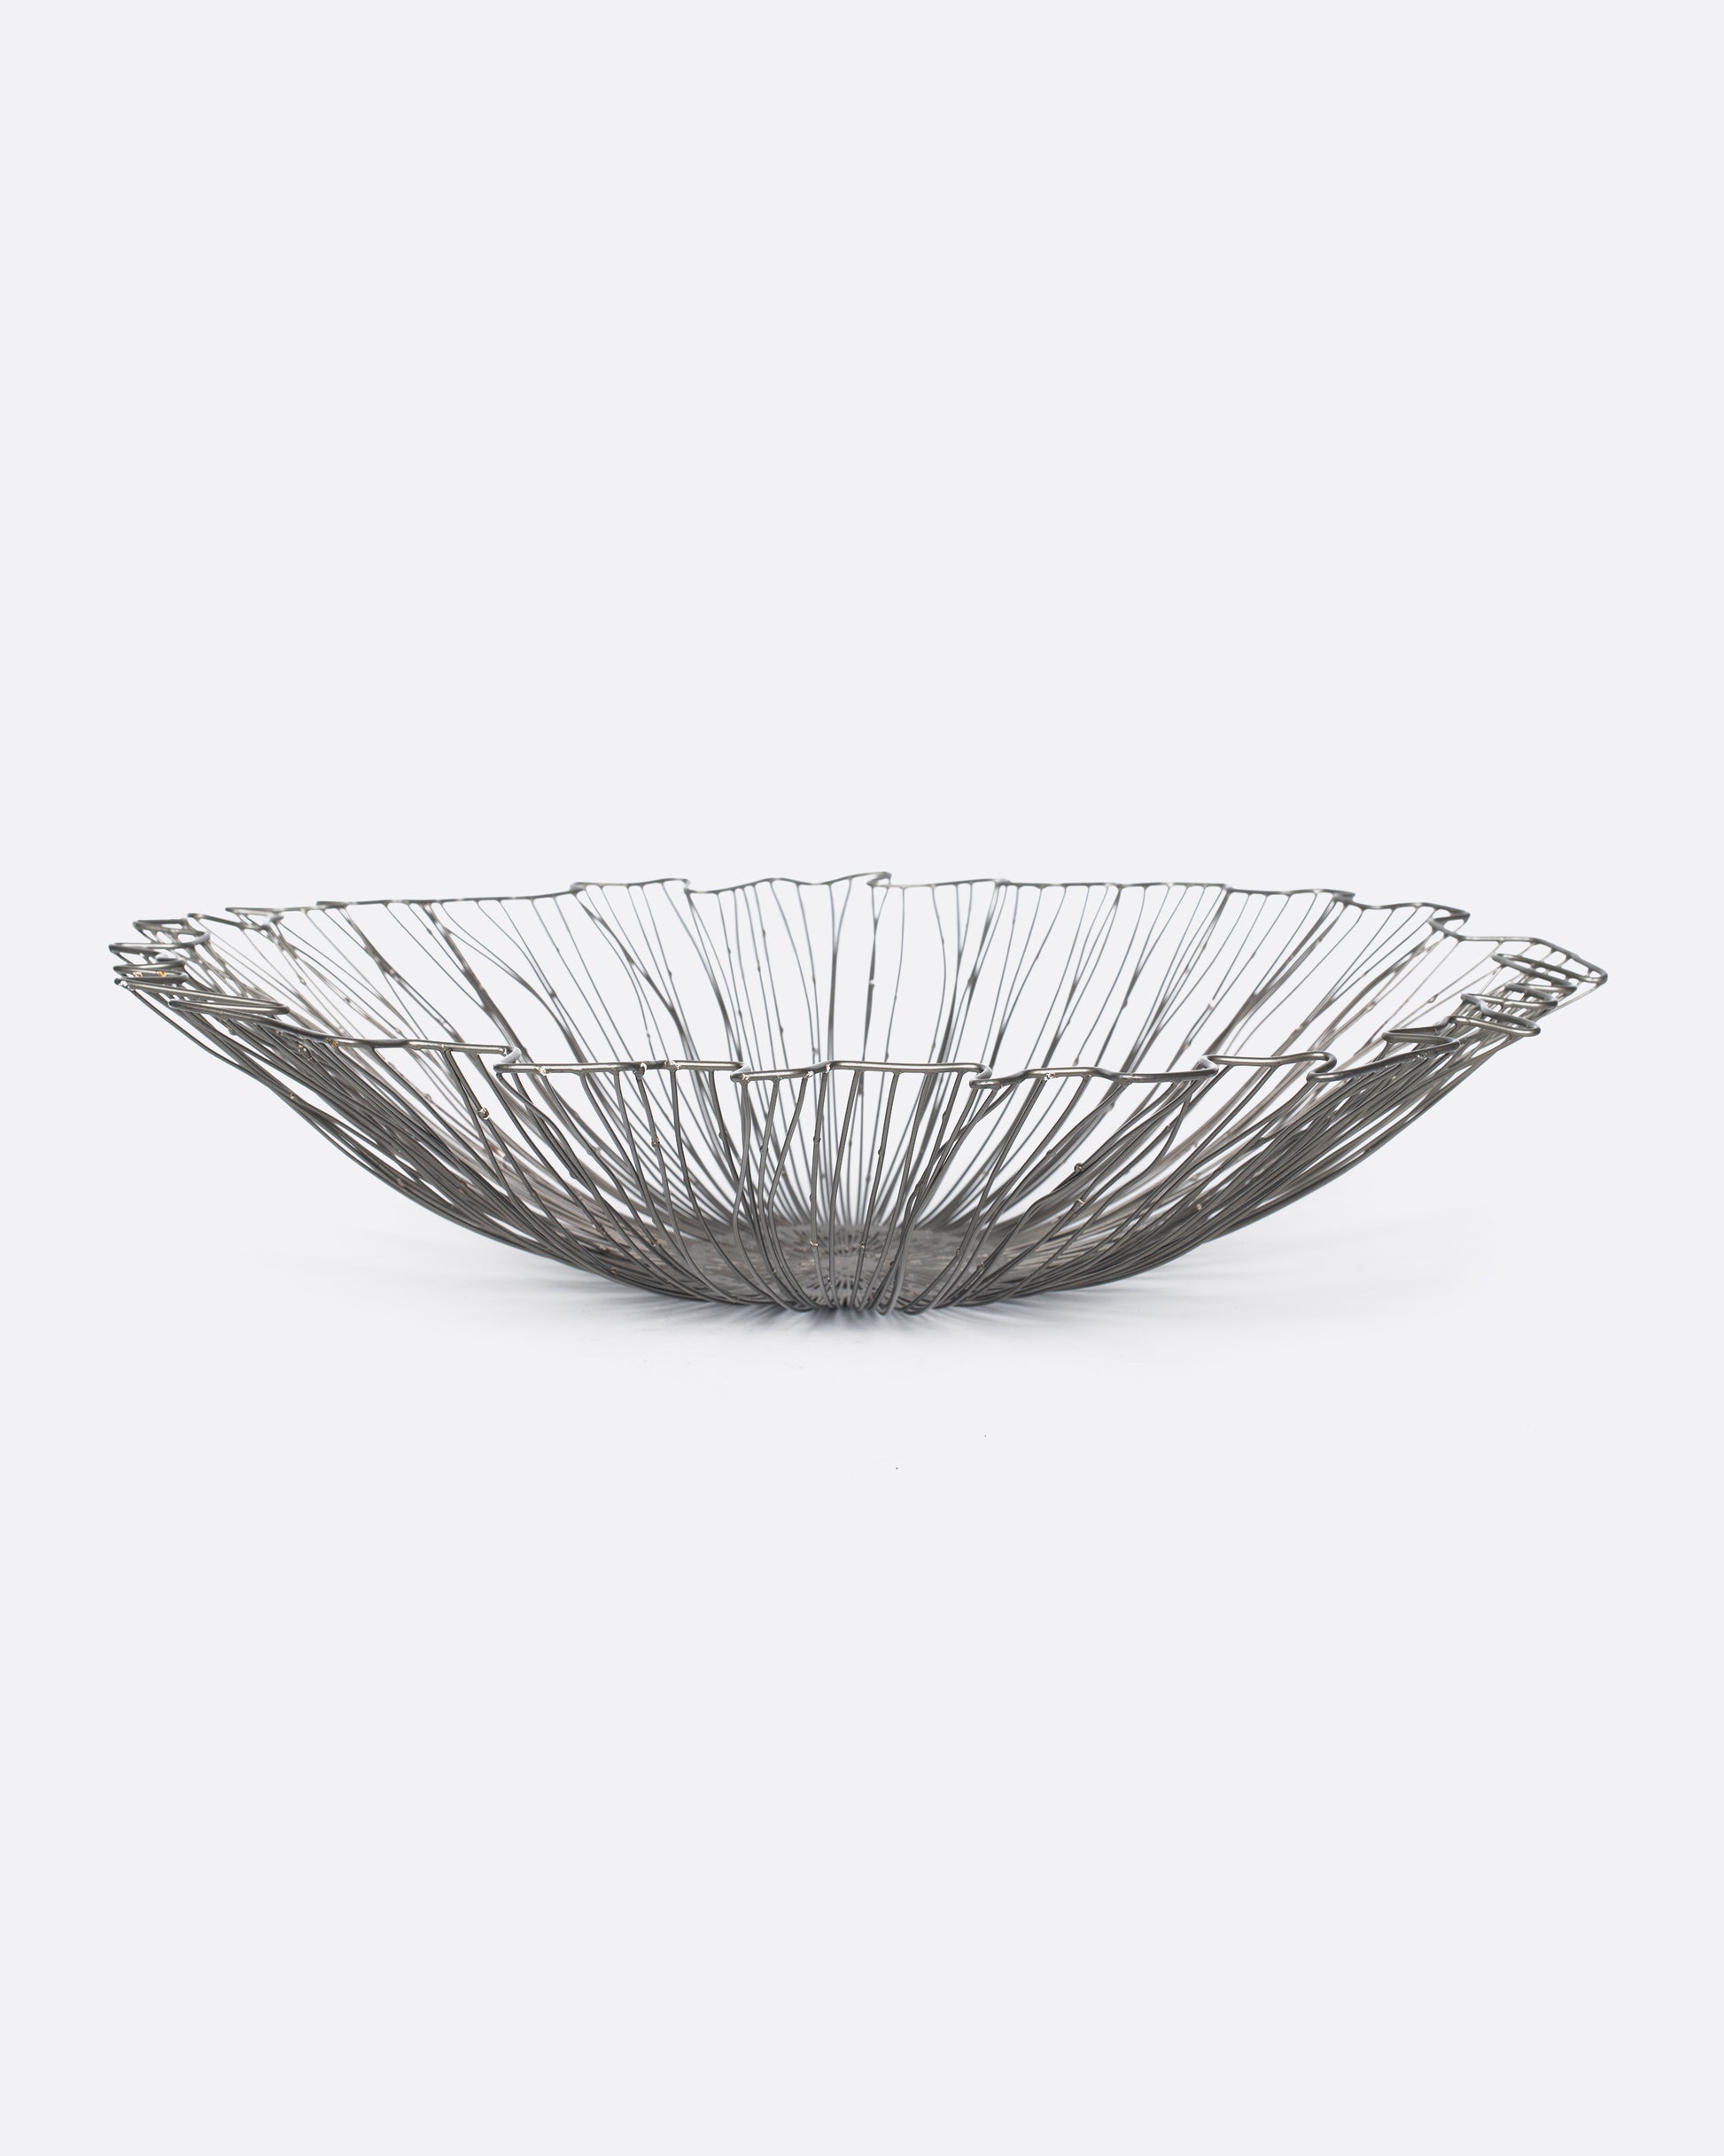 A wide, rippled wire bowl that's the perfect centerpiece for a kitchen island or dinner table.